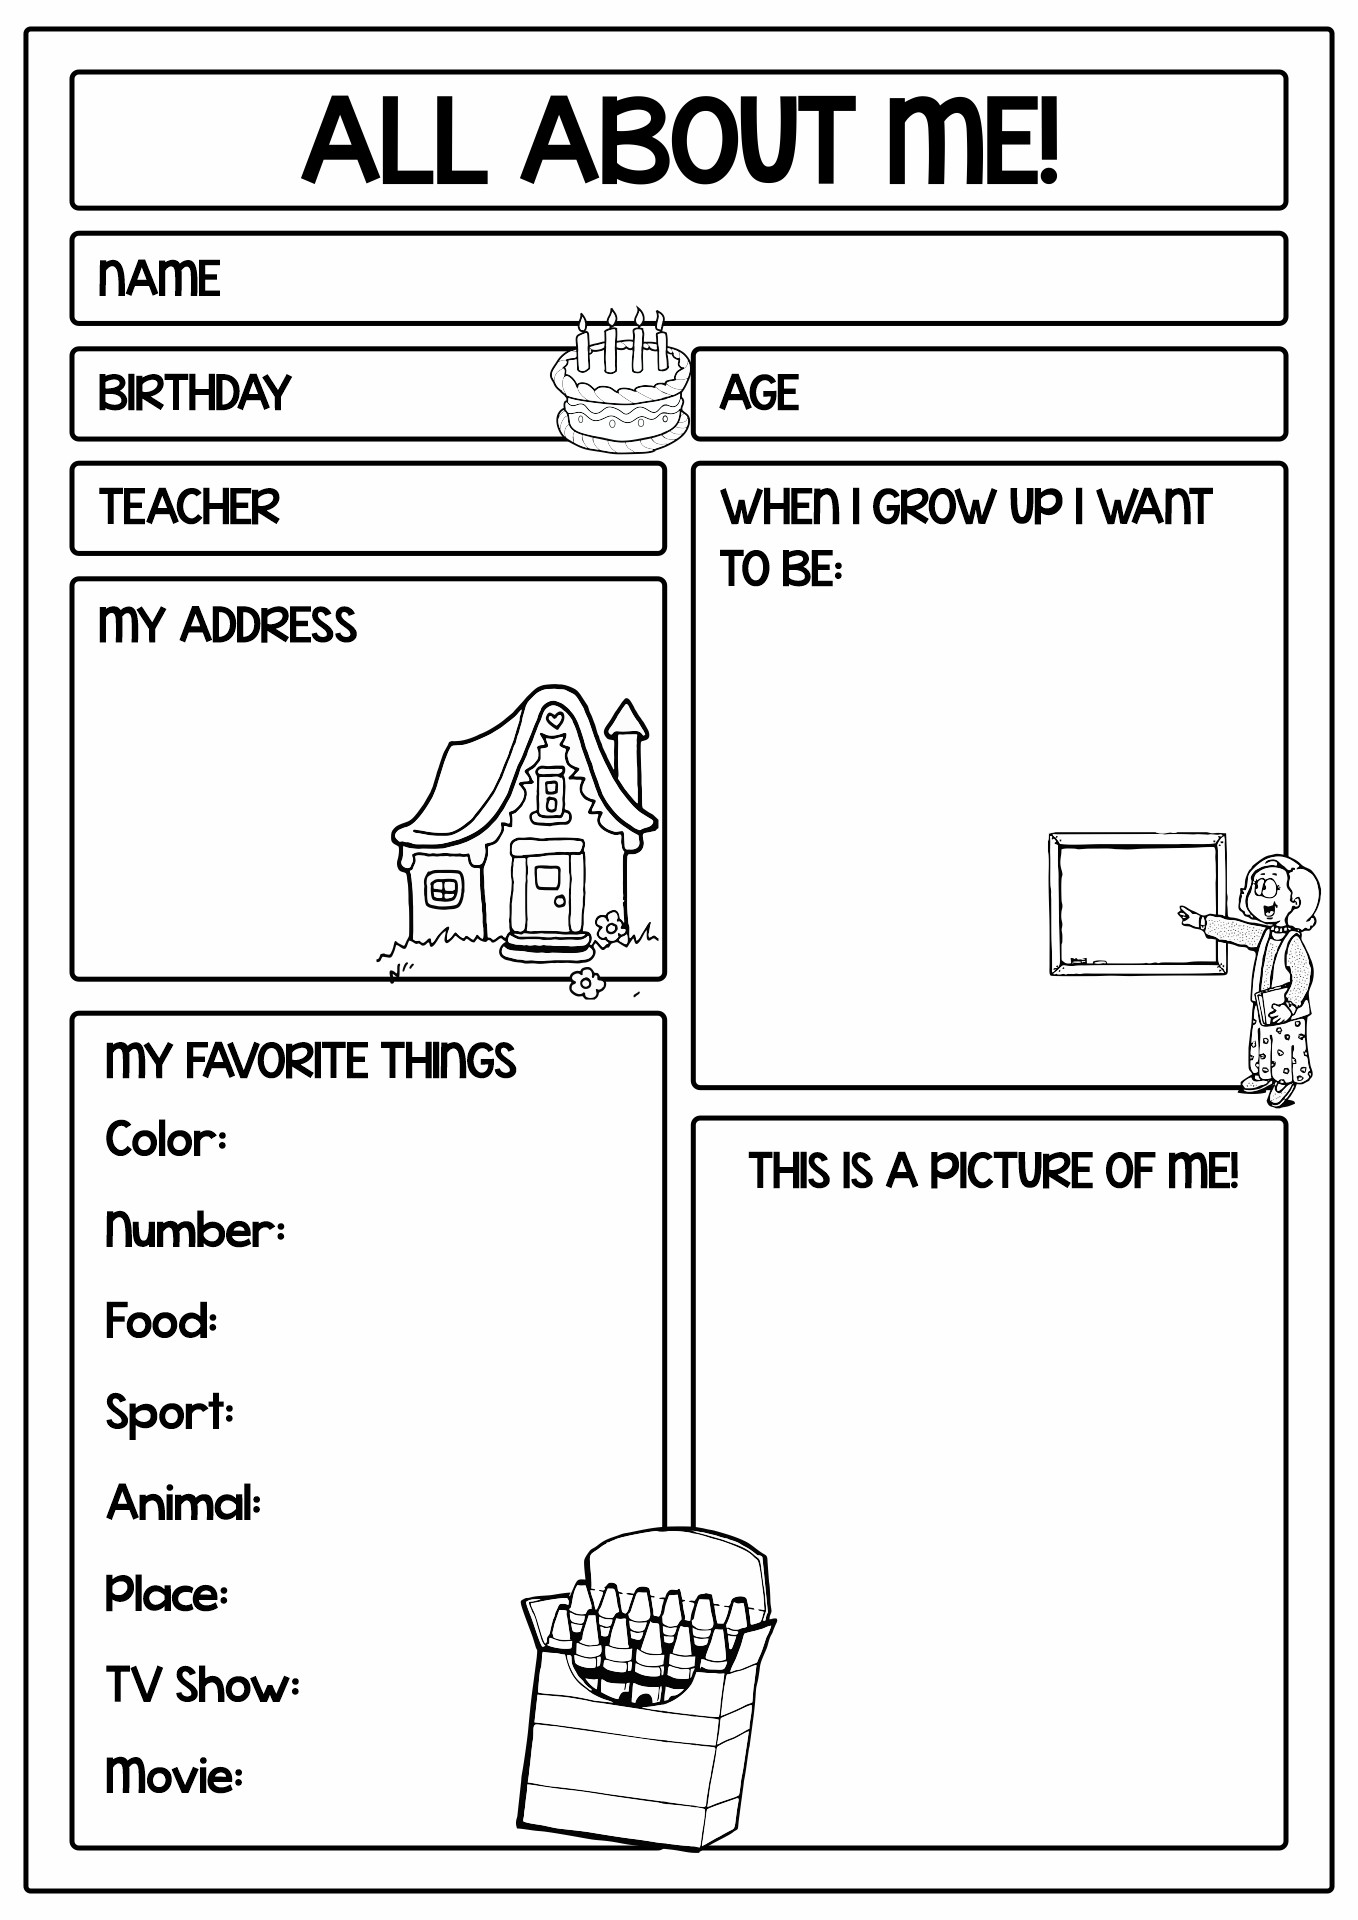 All About Me School Worksheet Image